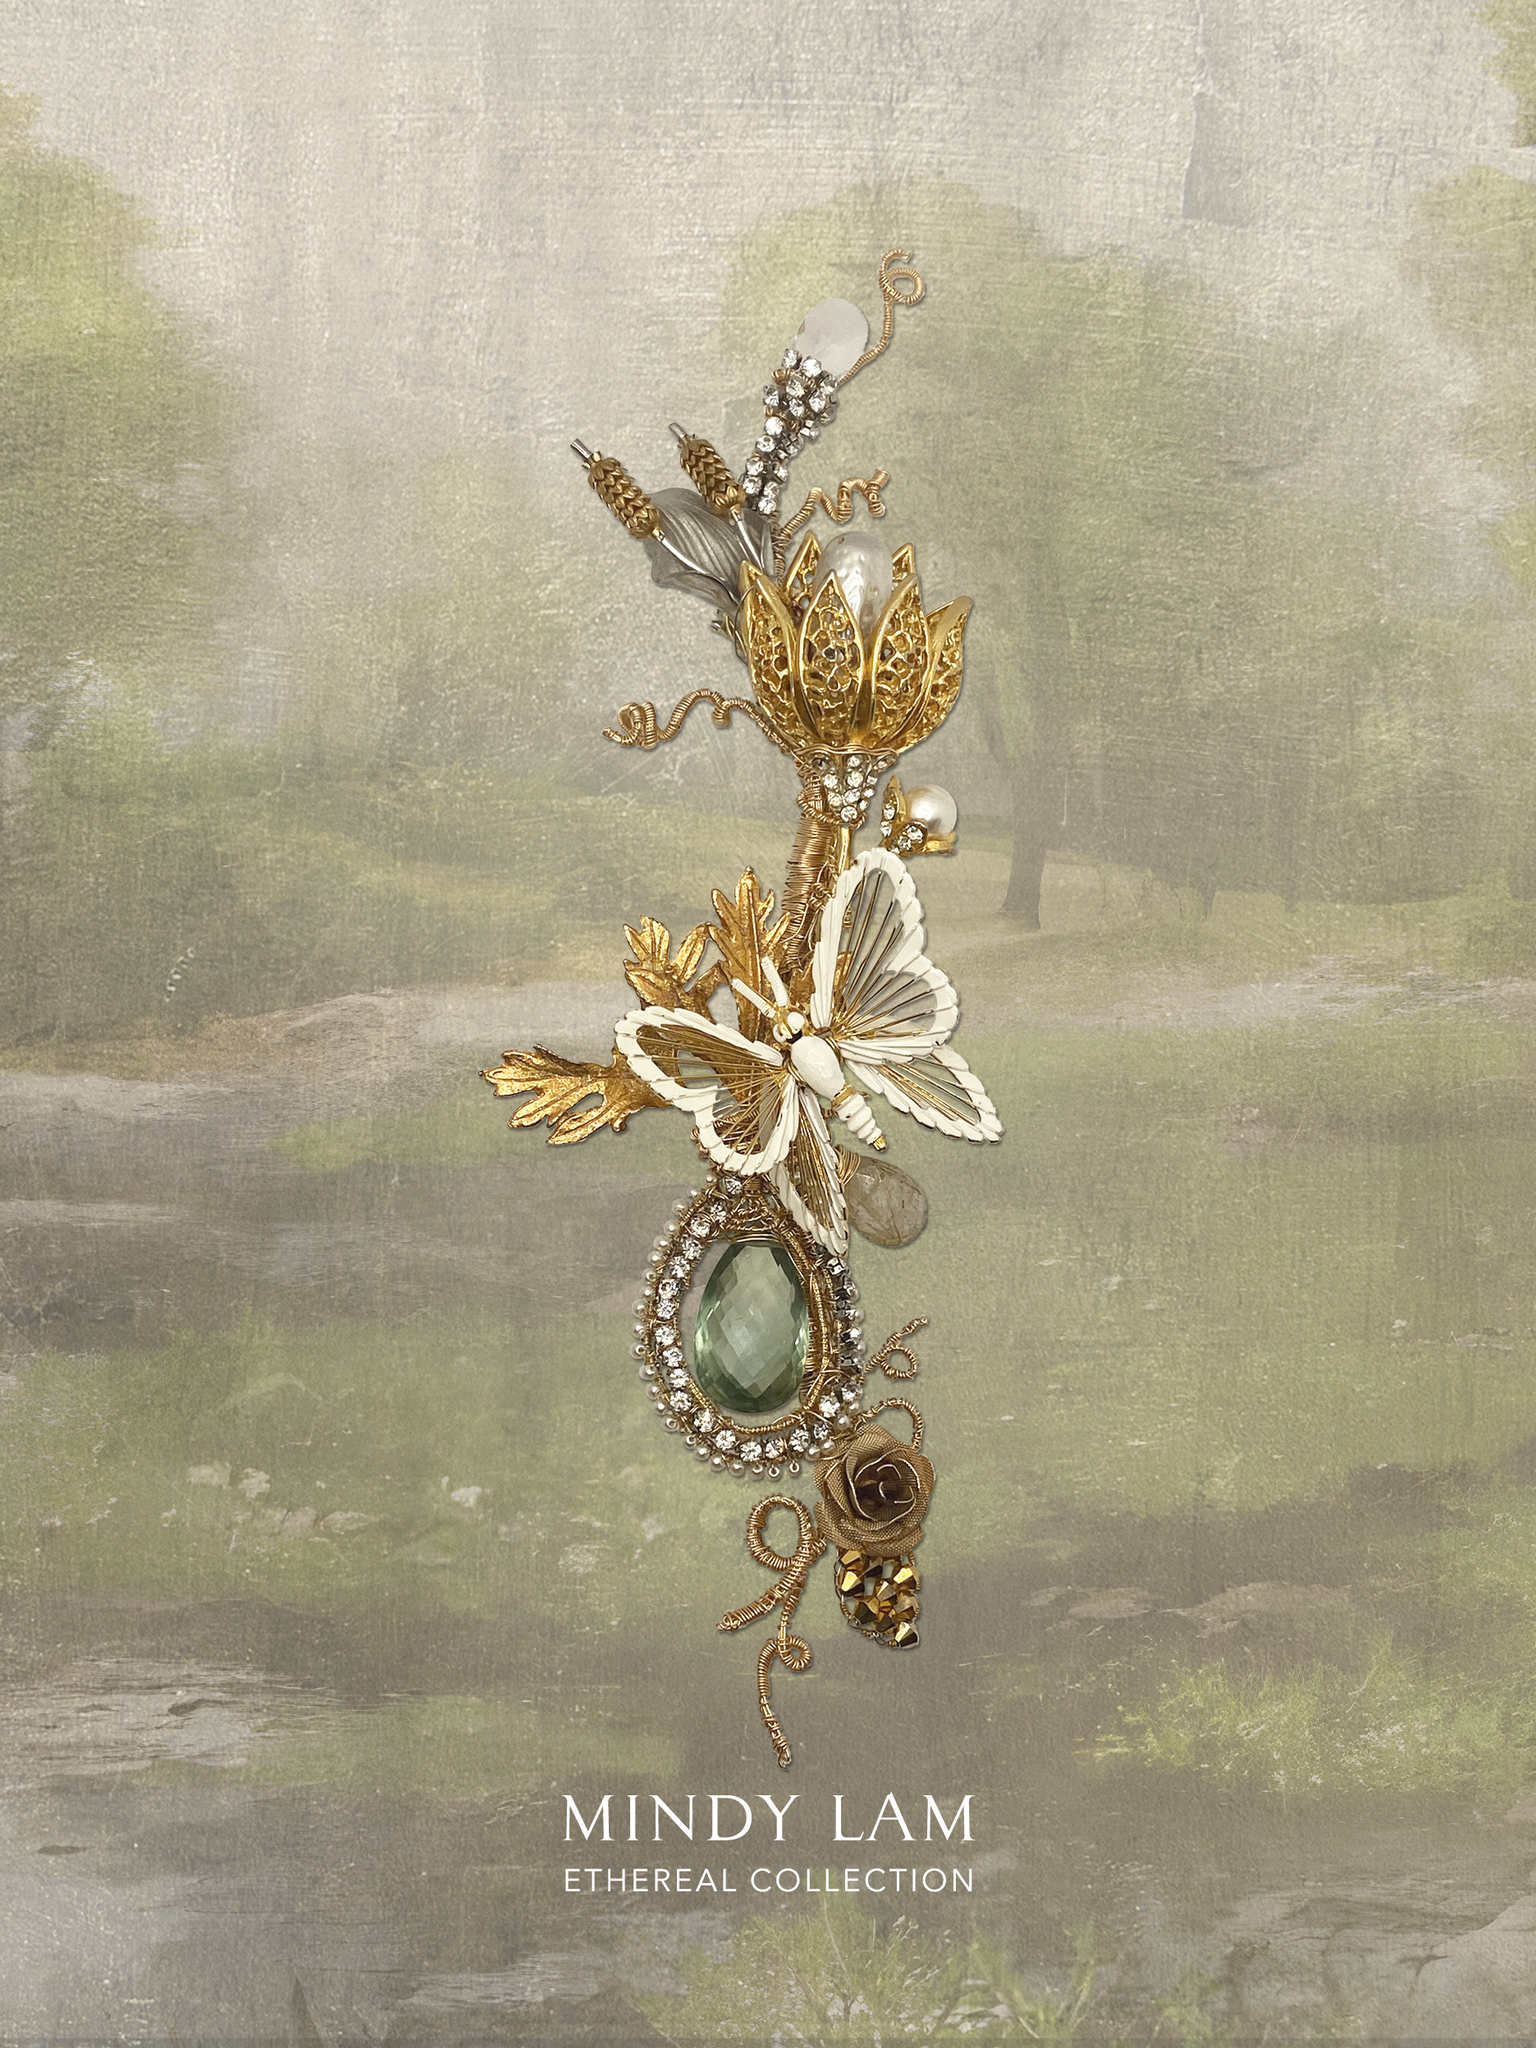 Ethereal Collection Lapel Pin - Lifeforce of the Magical Forest